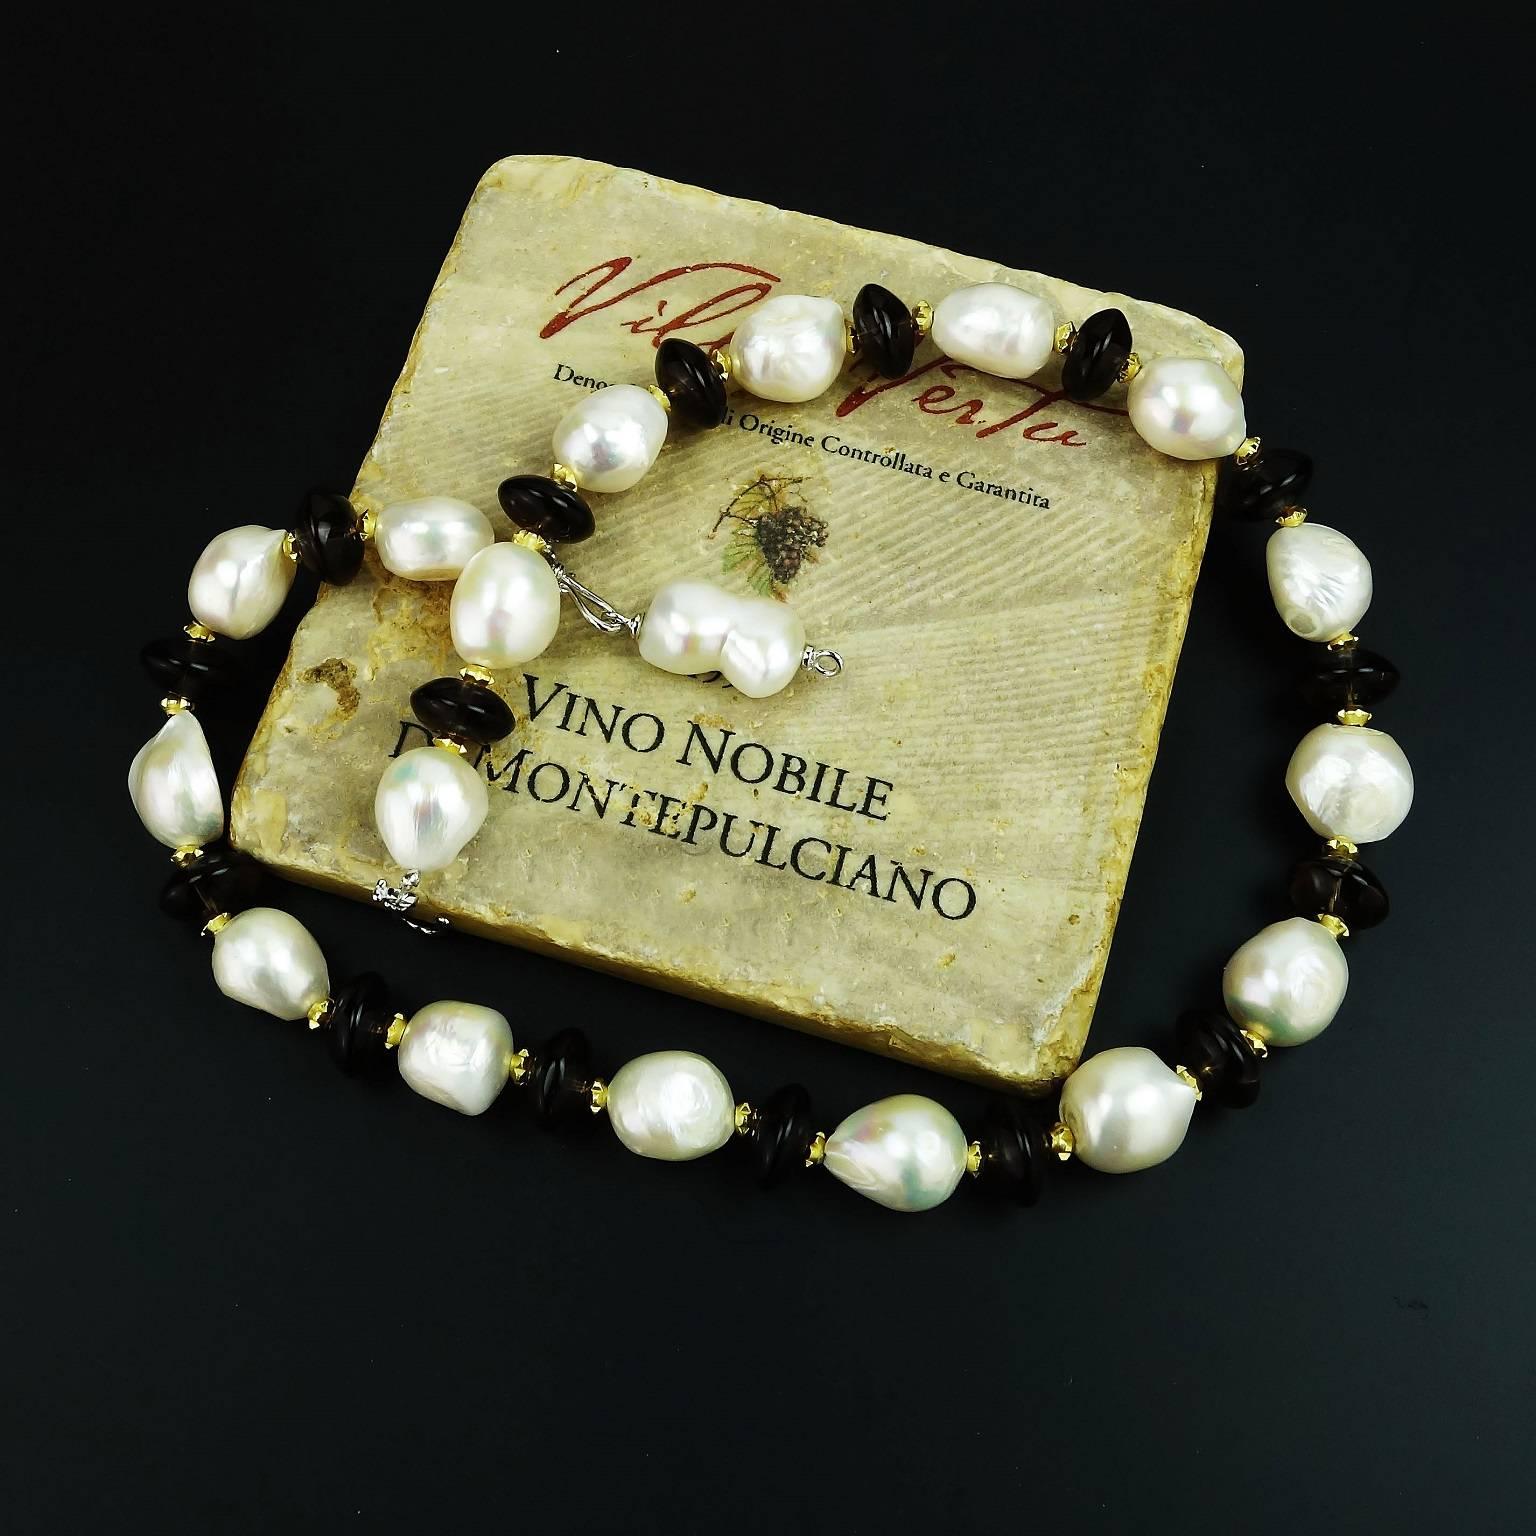 Women's Gemjunky Classic Necklace of White Pearls and Smoky Quartz Rondelles